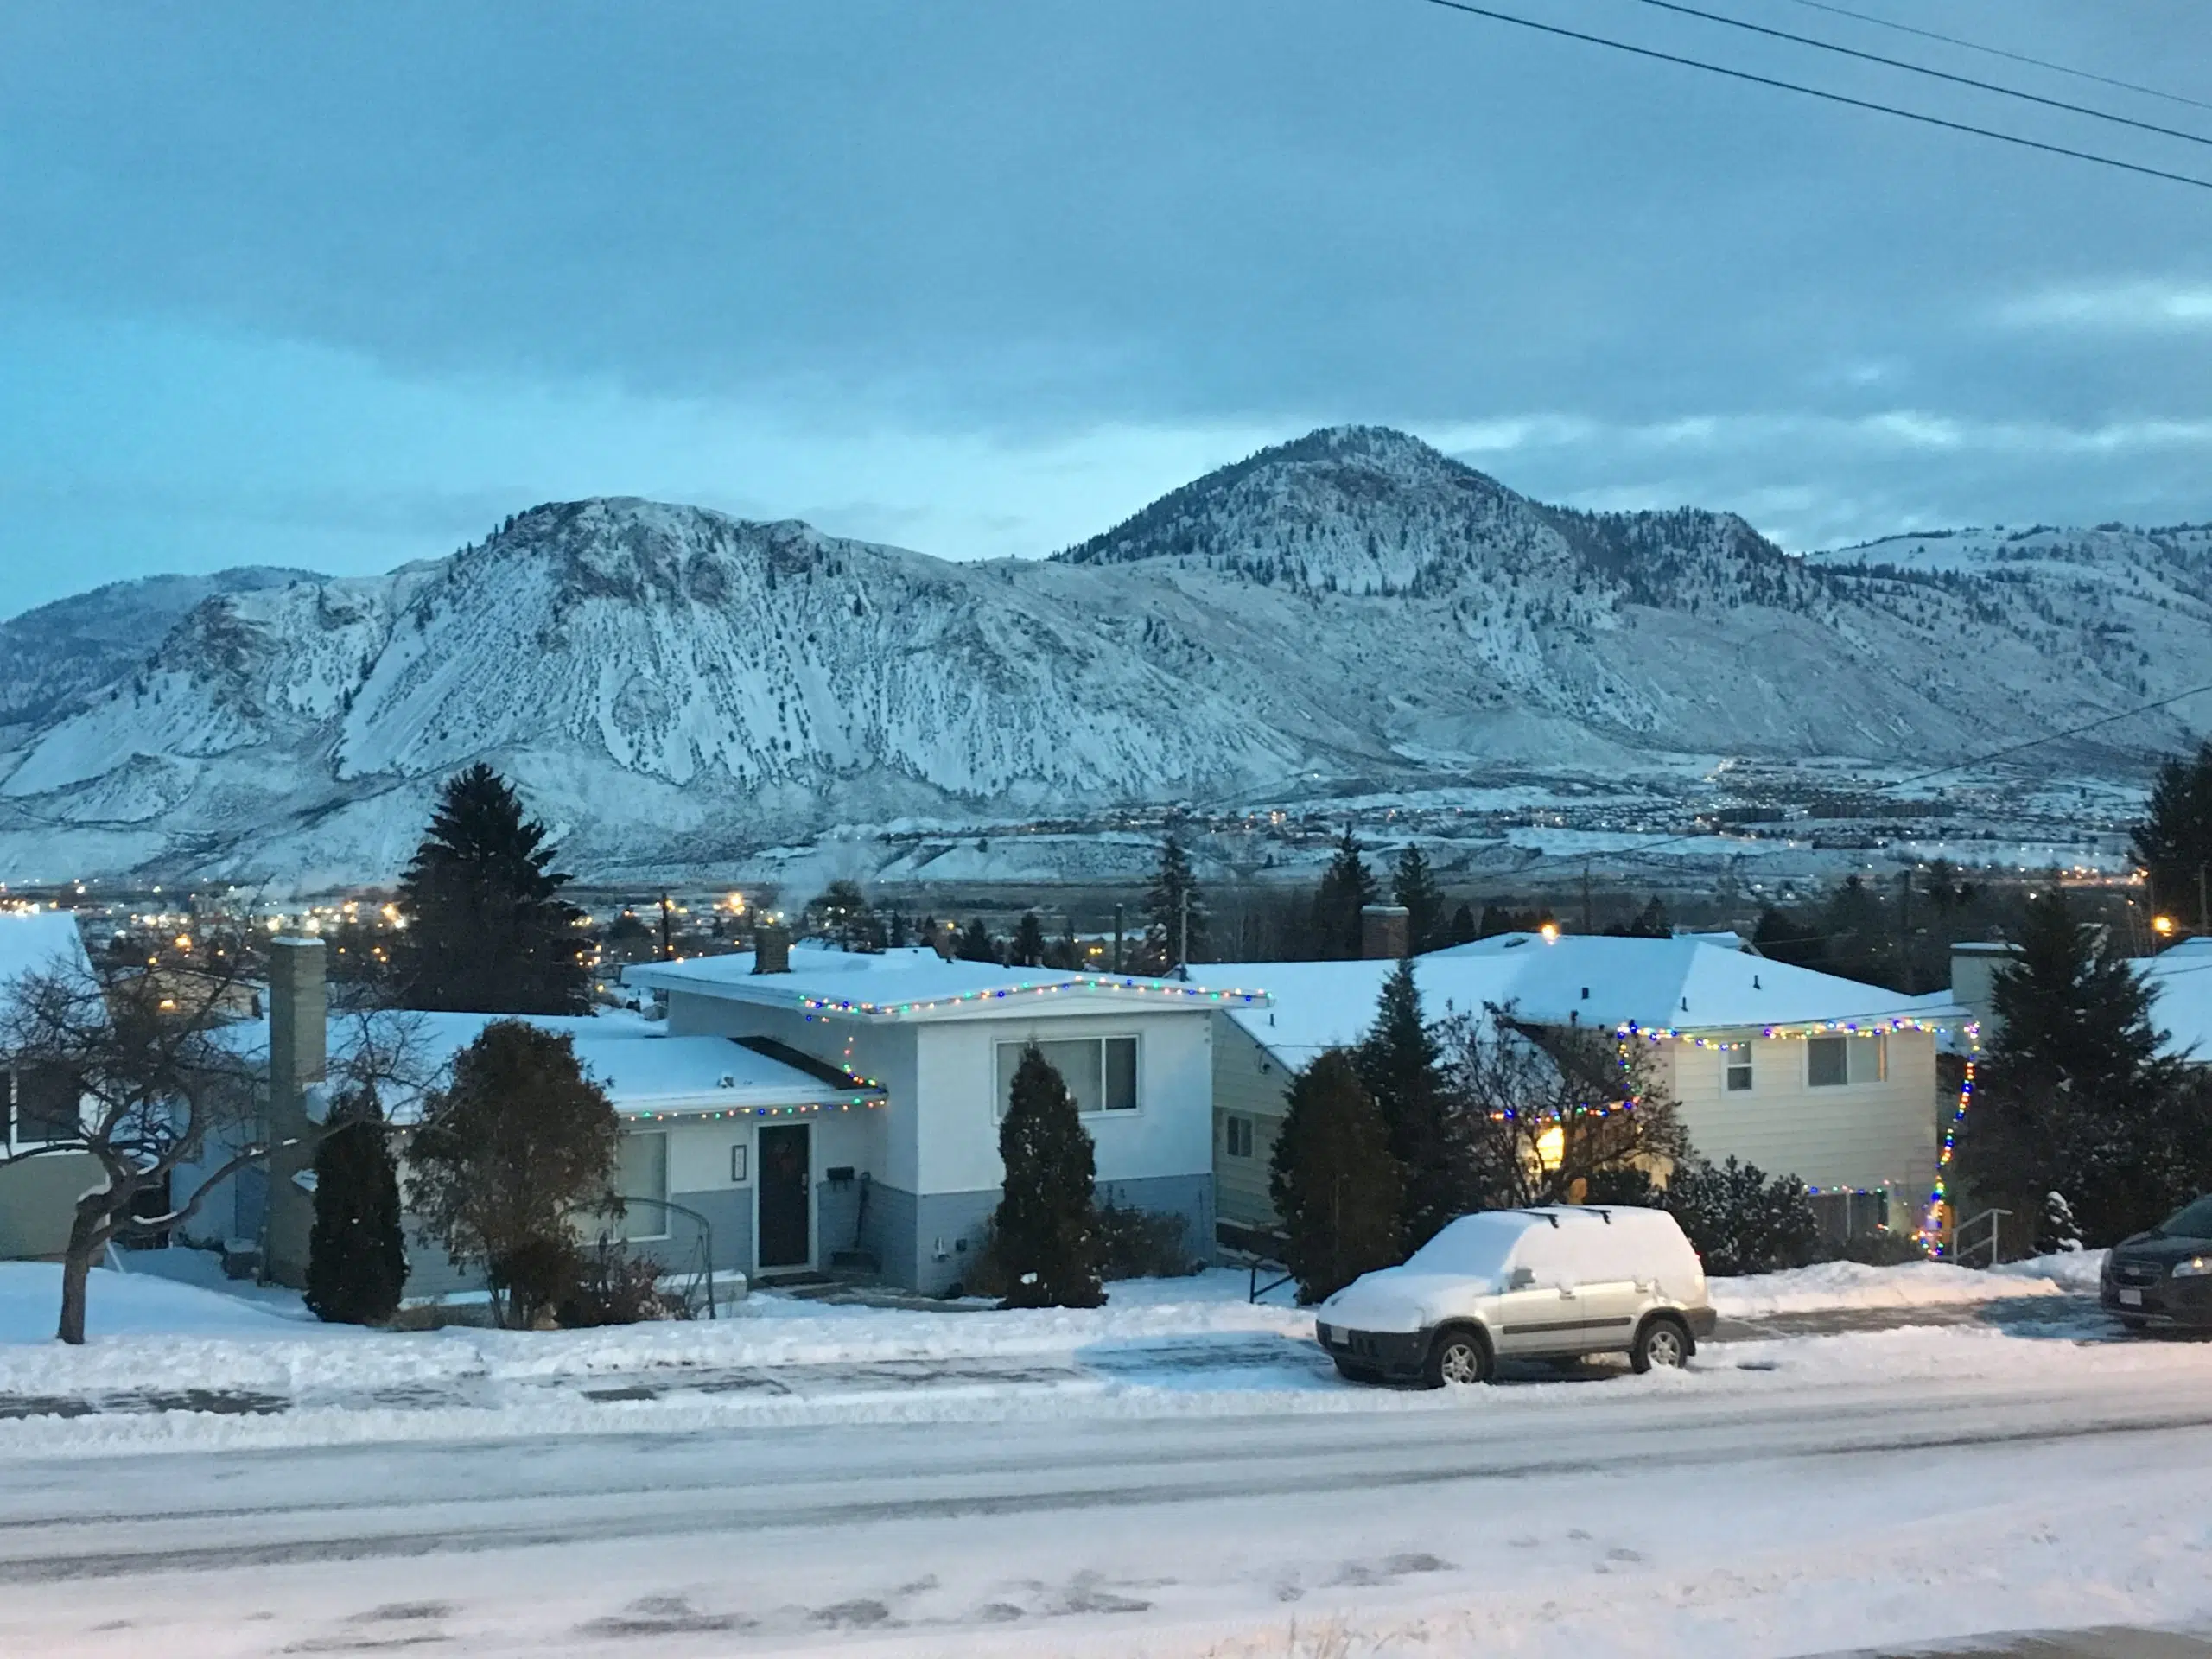 Clarity on the way around extreme cold shelter plans for Kamloops